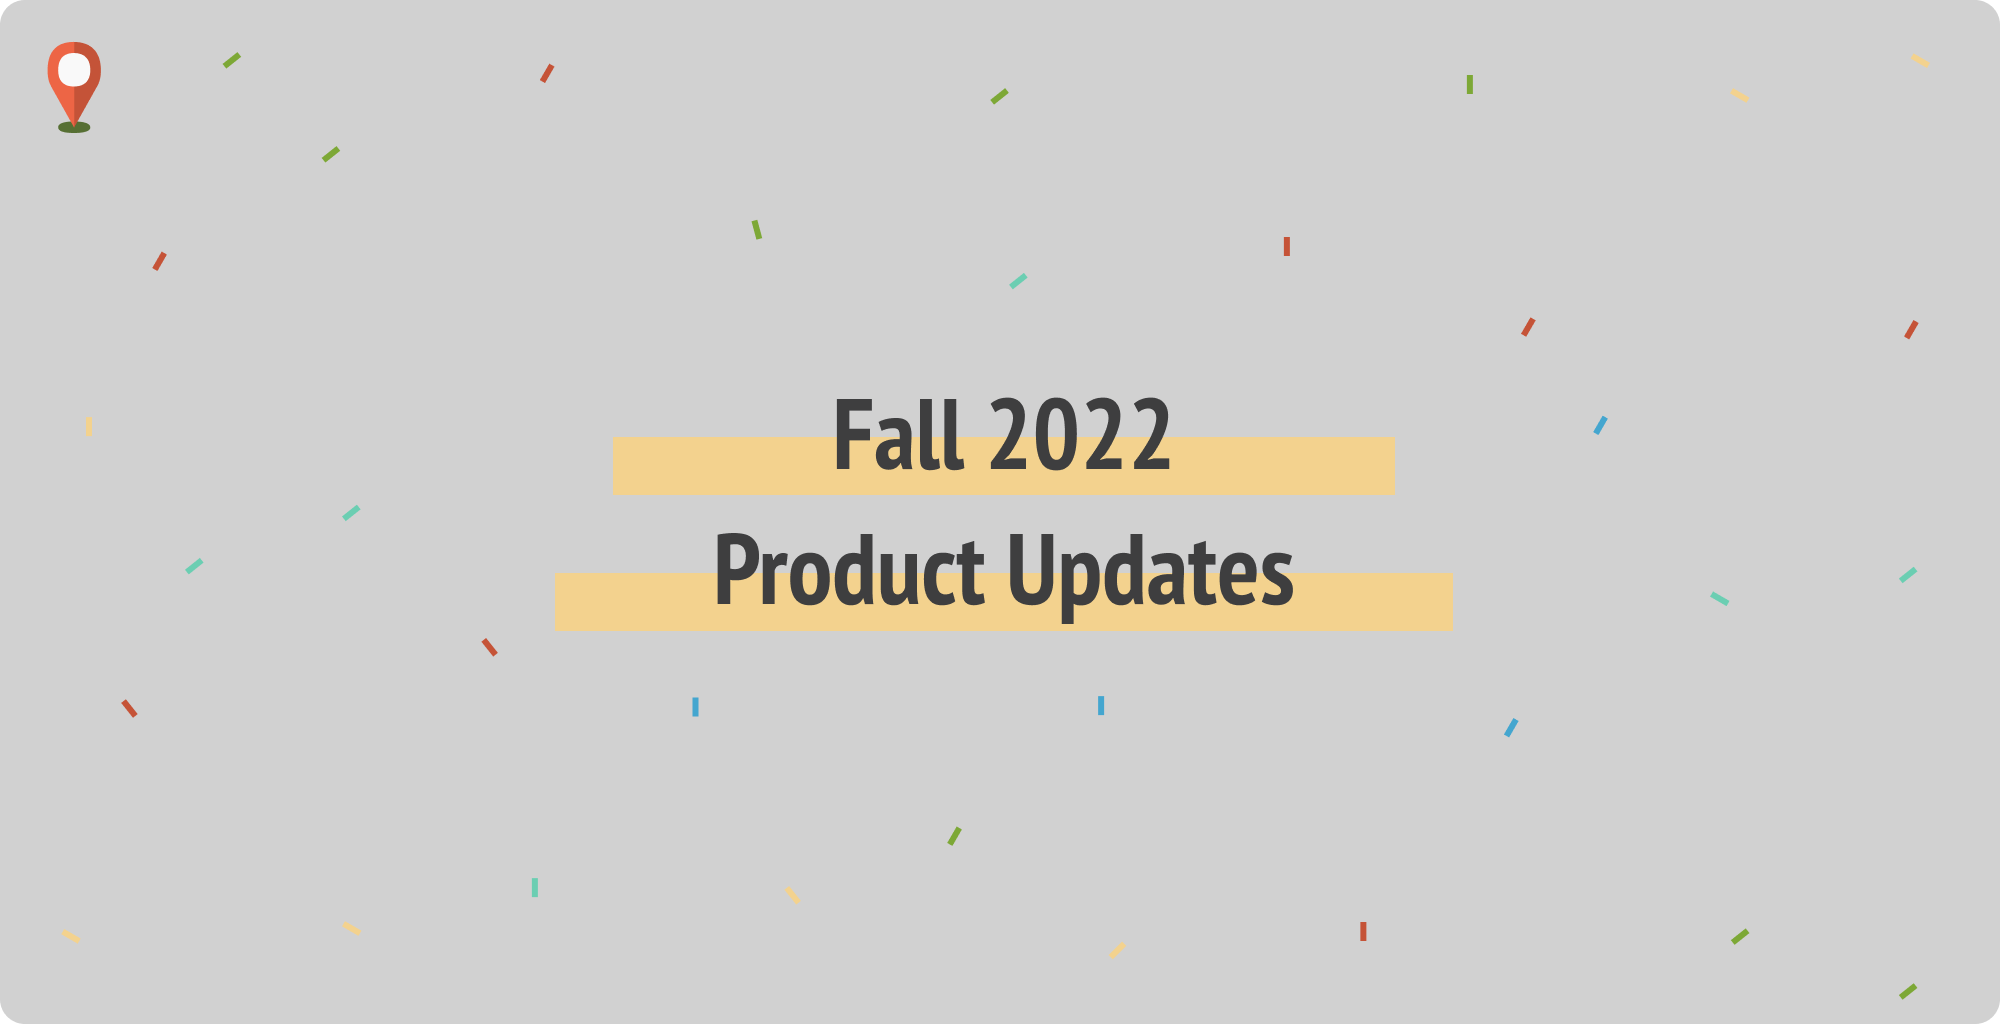 Fall 2022 Product Updates